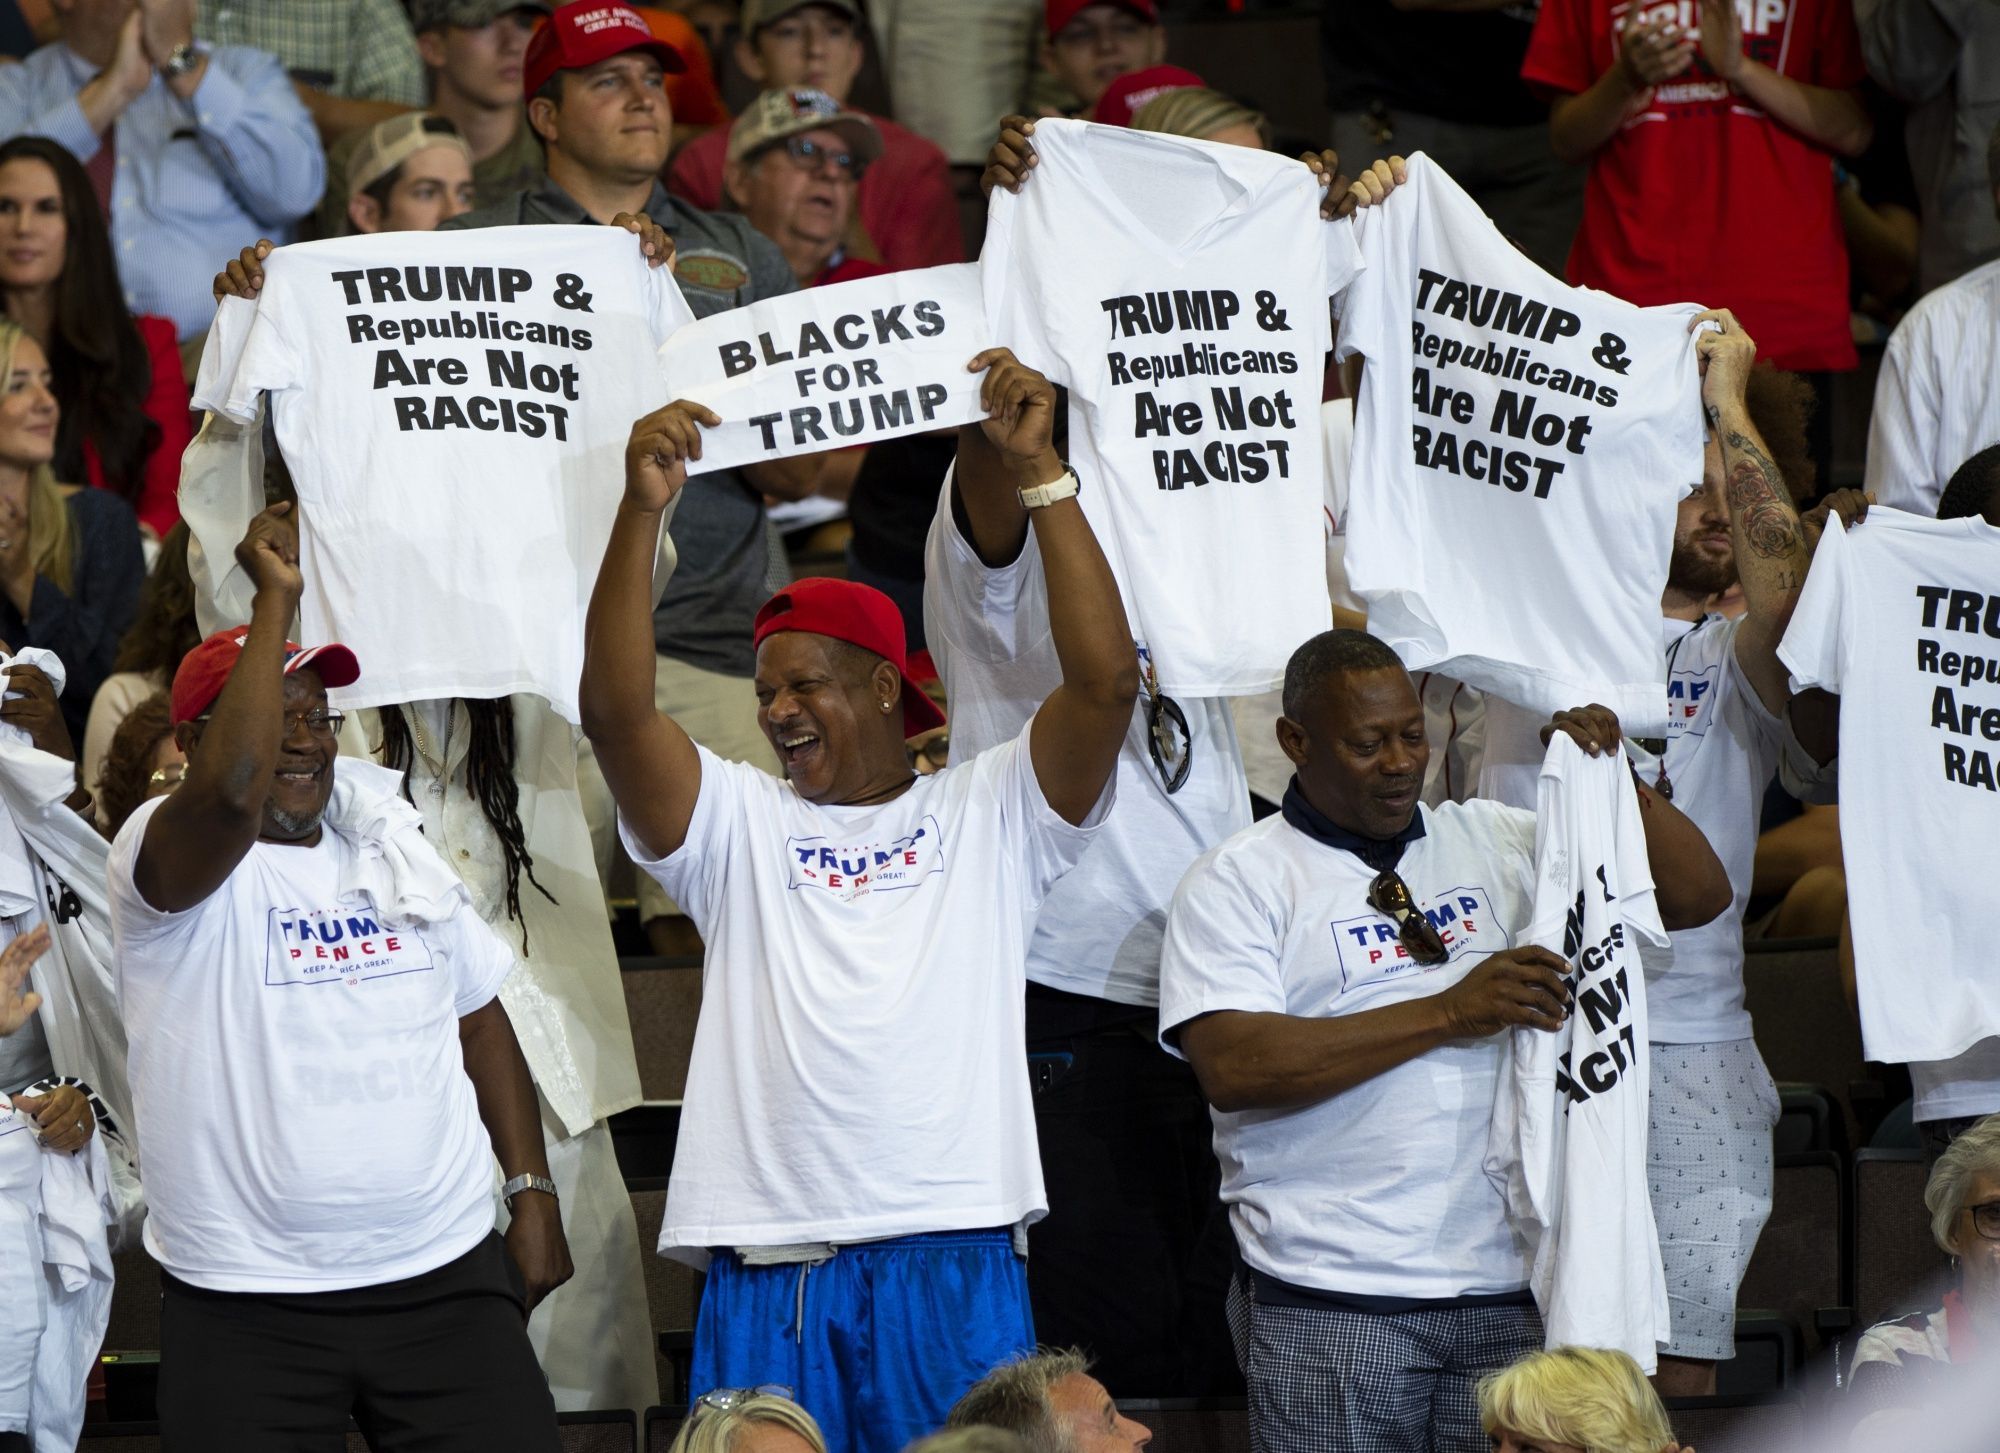 REVEALED: No pipe dream. How the Trump campaign intends to win minority Dems
